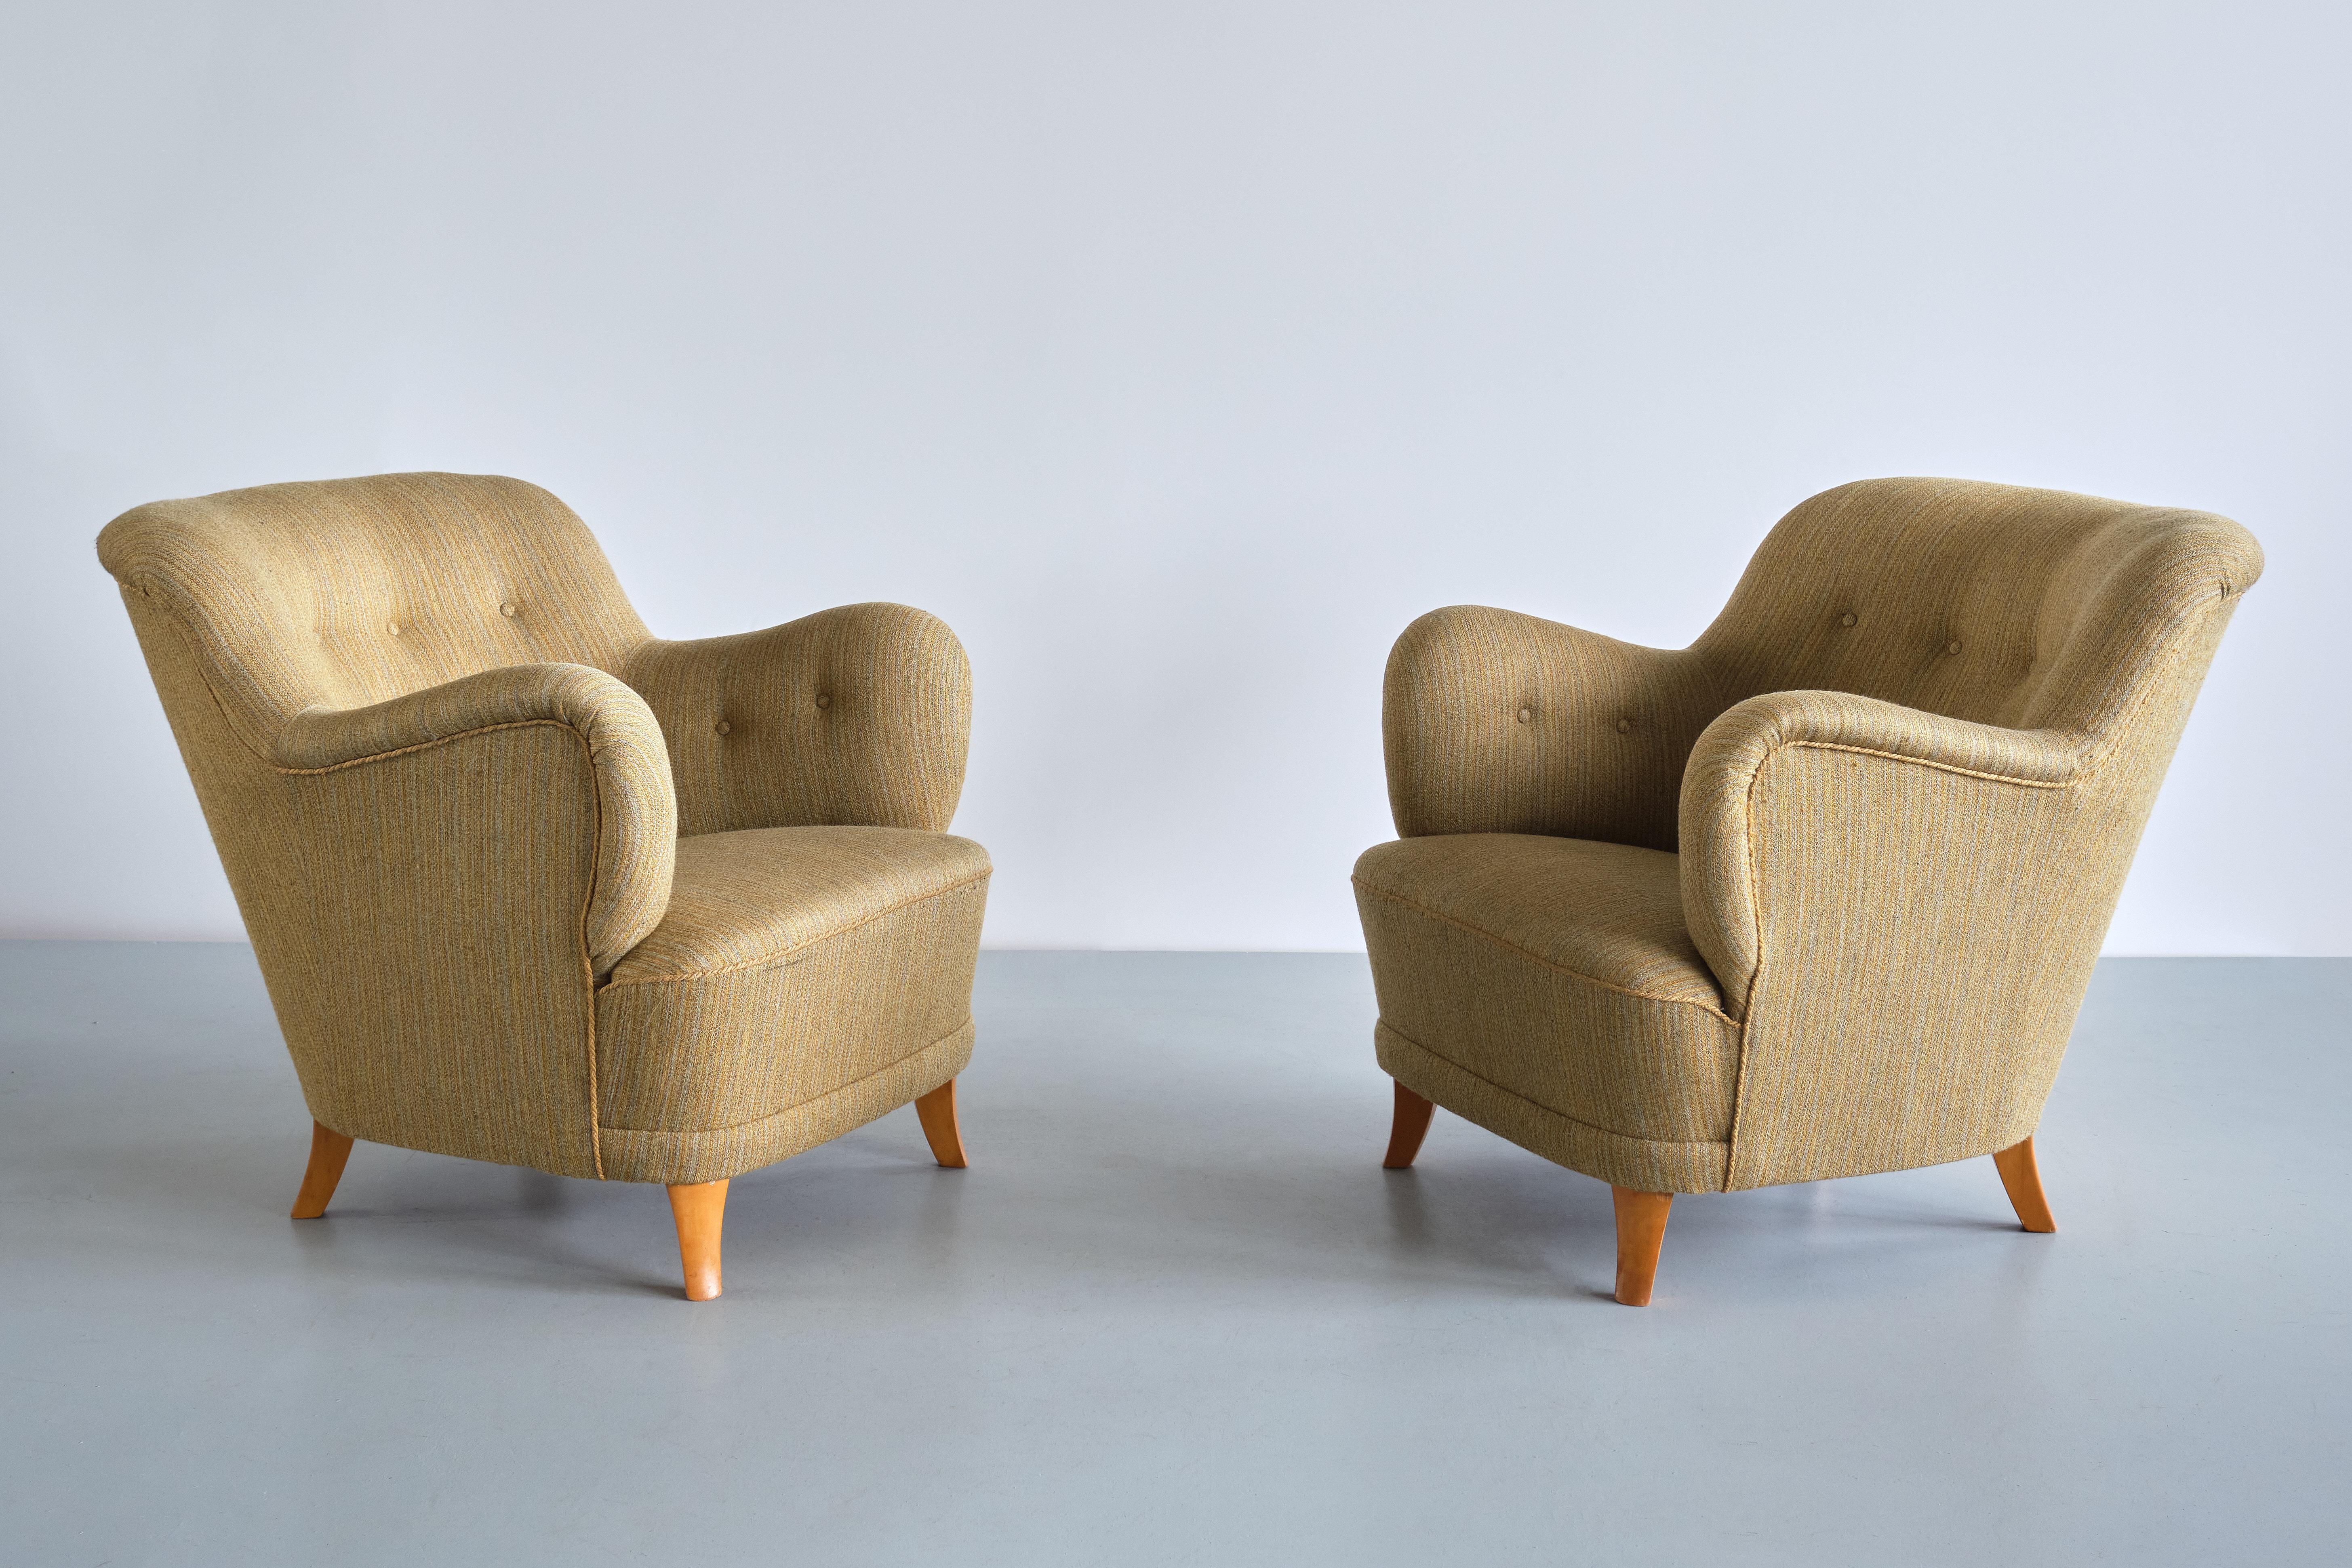 This rare pair of armchairs was designed by Gustav Axel Berg in the late 1940s. The chairs were manufactured by Berg's own company AB G.A. Bergs in Sweden.
The striking design is marked by the sculptural, rounded arms and the organic lines of the